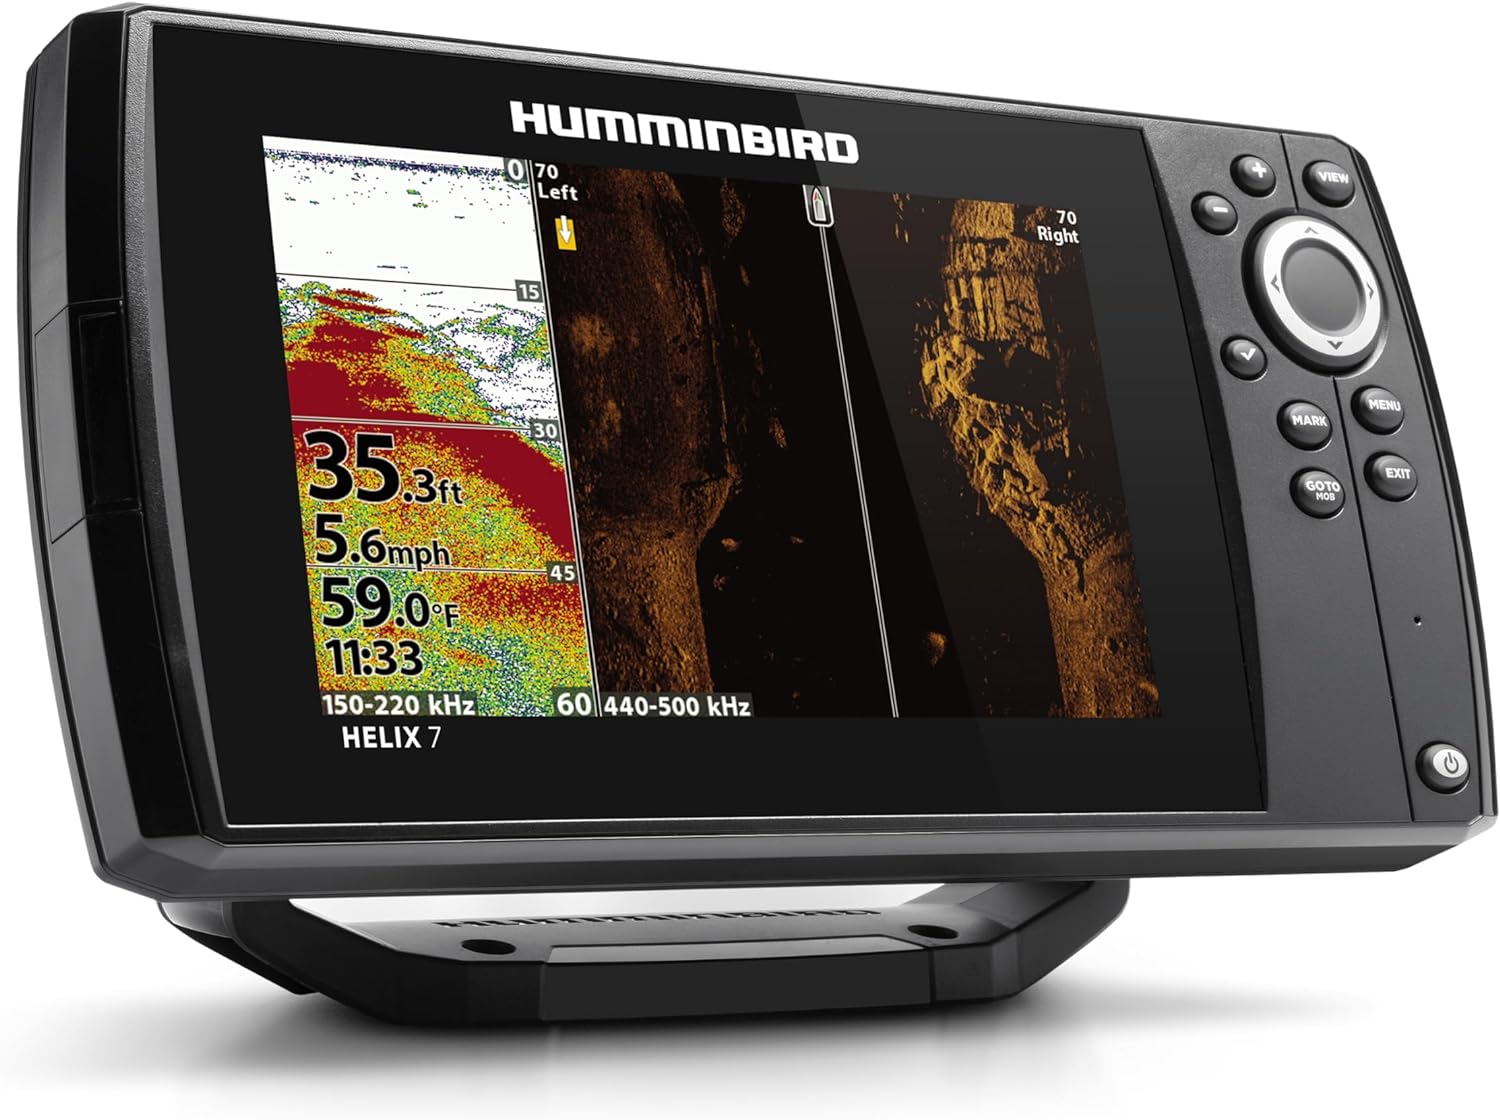 Humminbird 411590-1 Helix 7 Chirp SI GPS G4 - Our Top 10 Hummingbird Fish Finders Reviewed